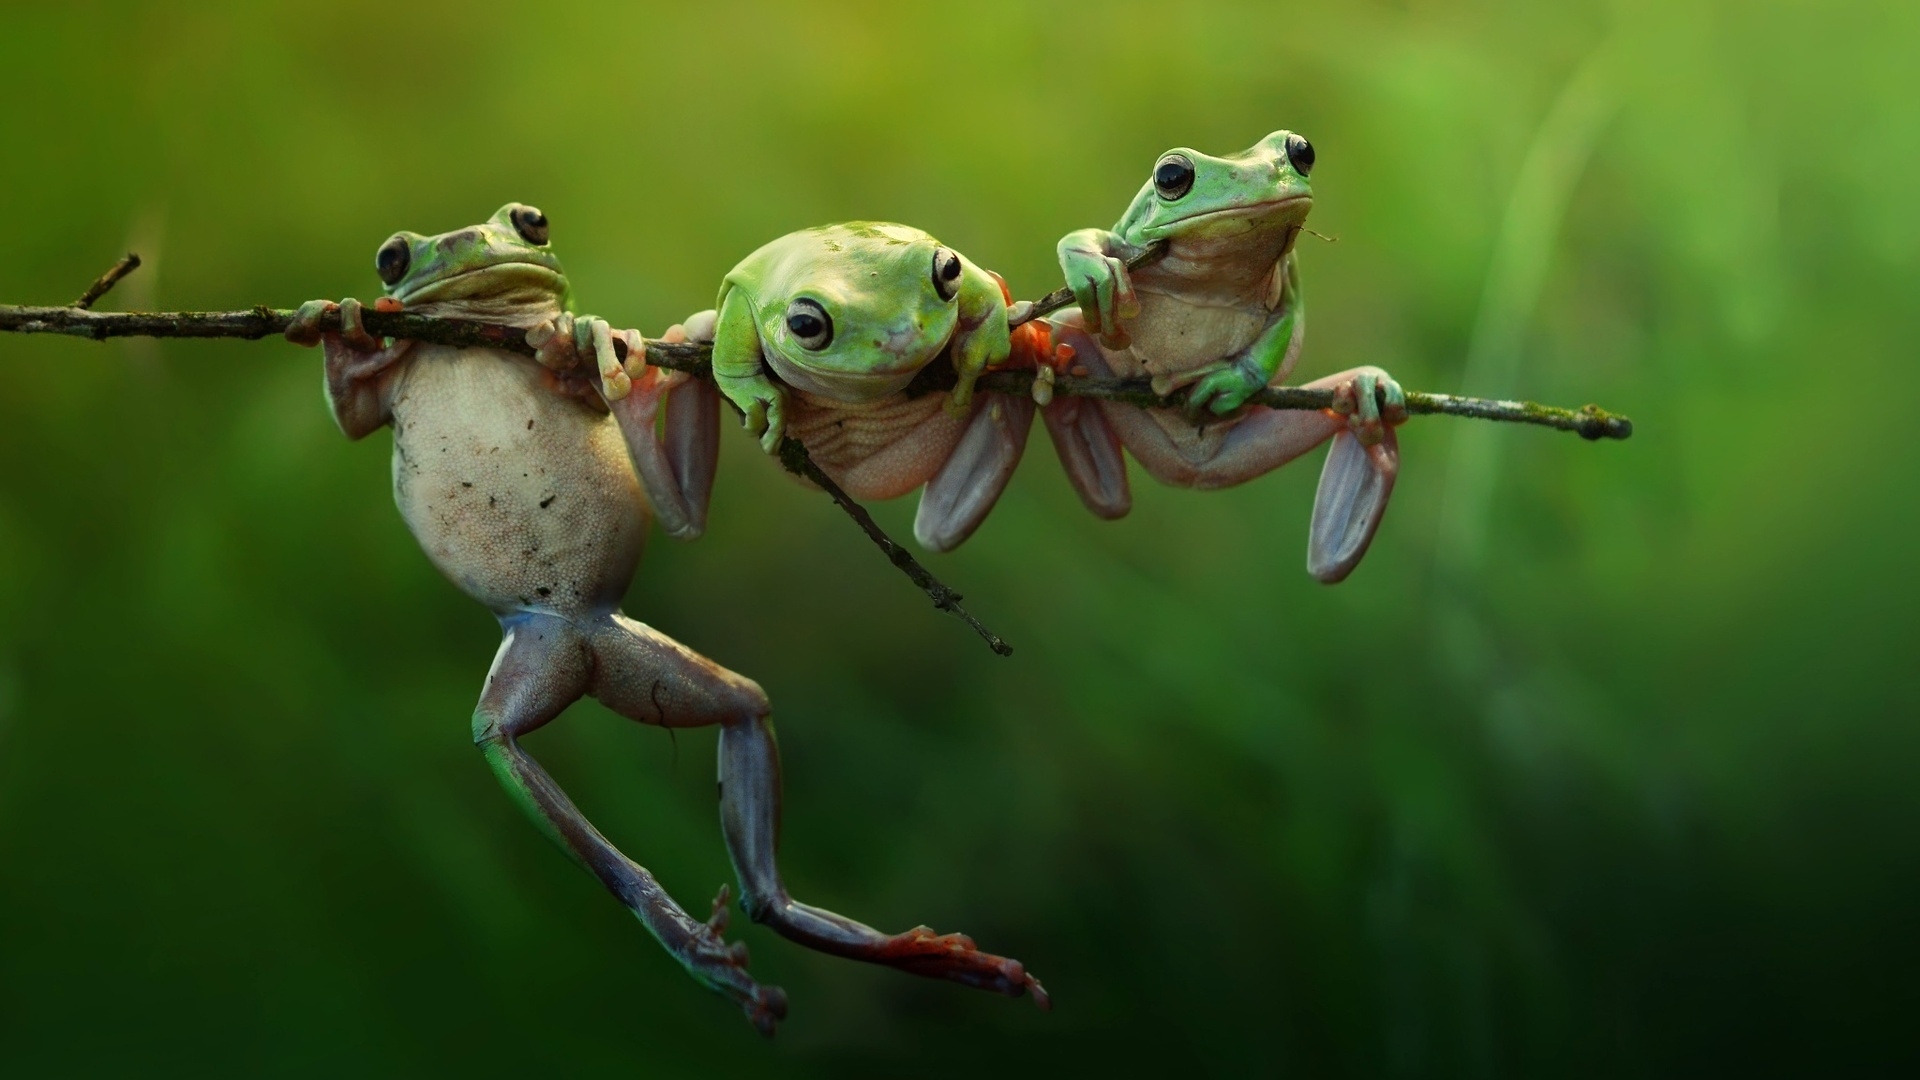 Three Frogs on a Branch for 1920 x 1080 HDTV 1080p resolution